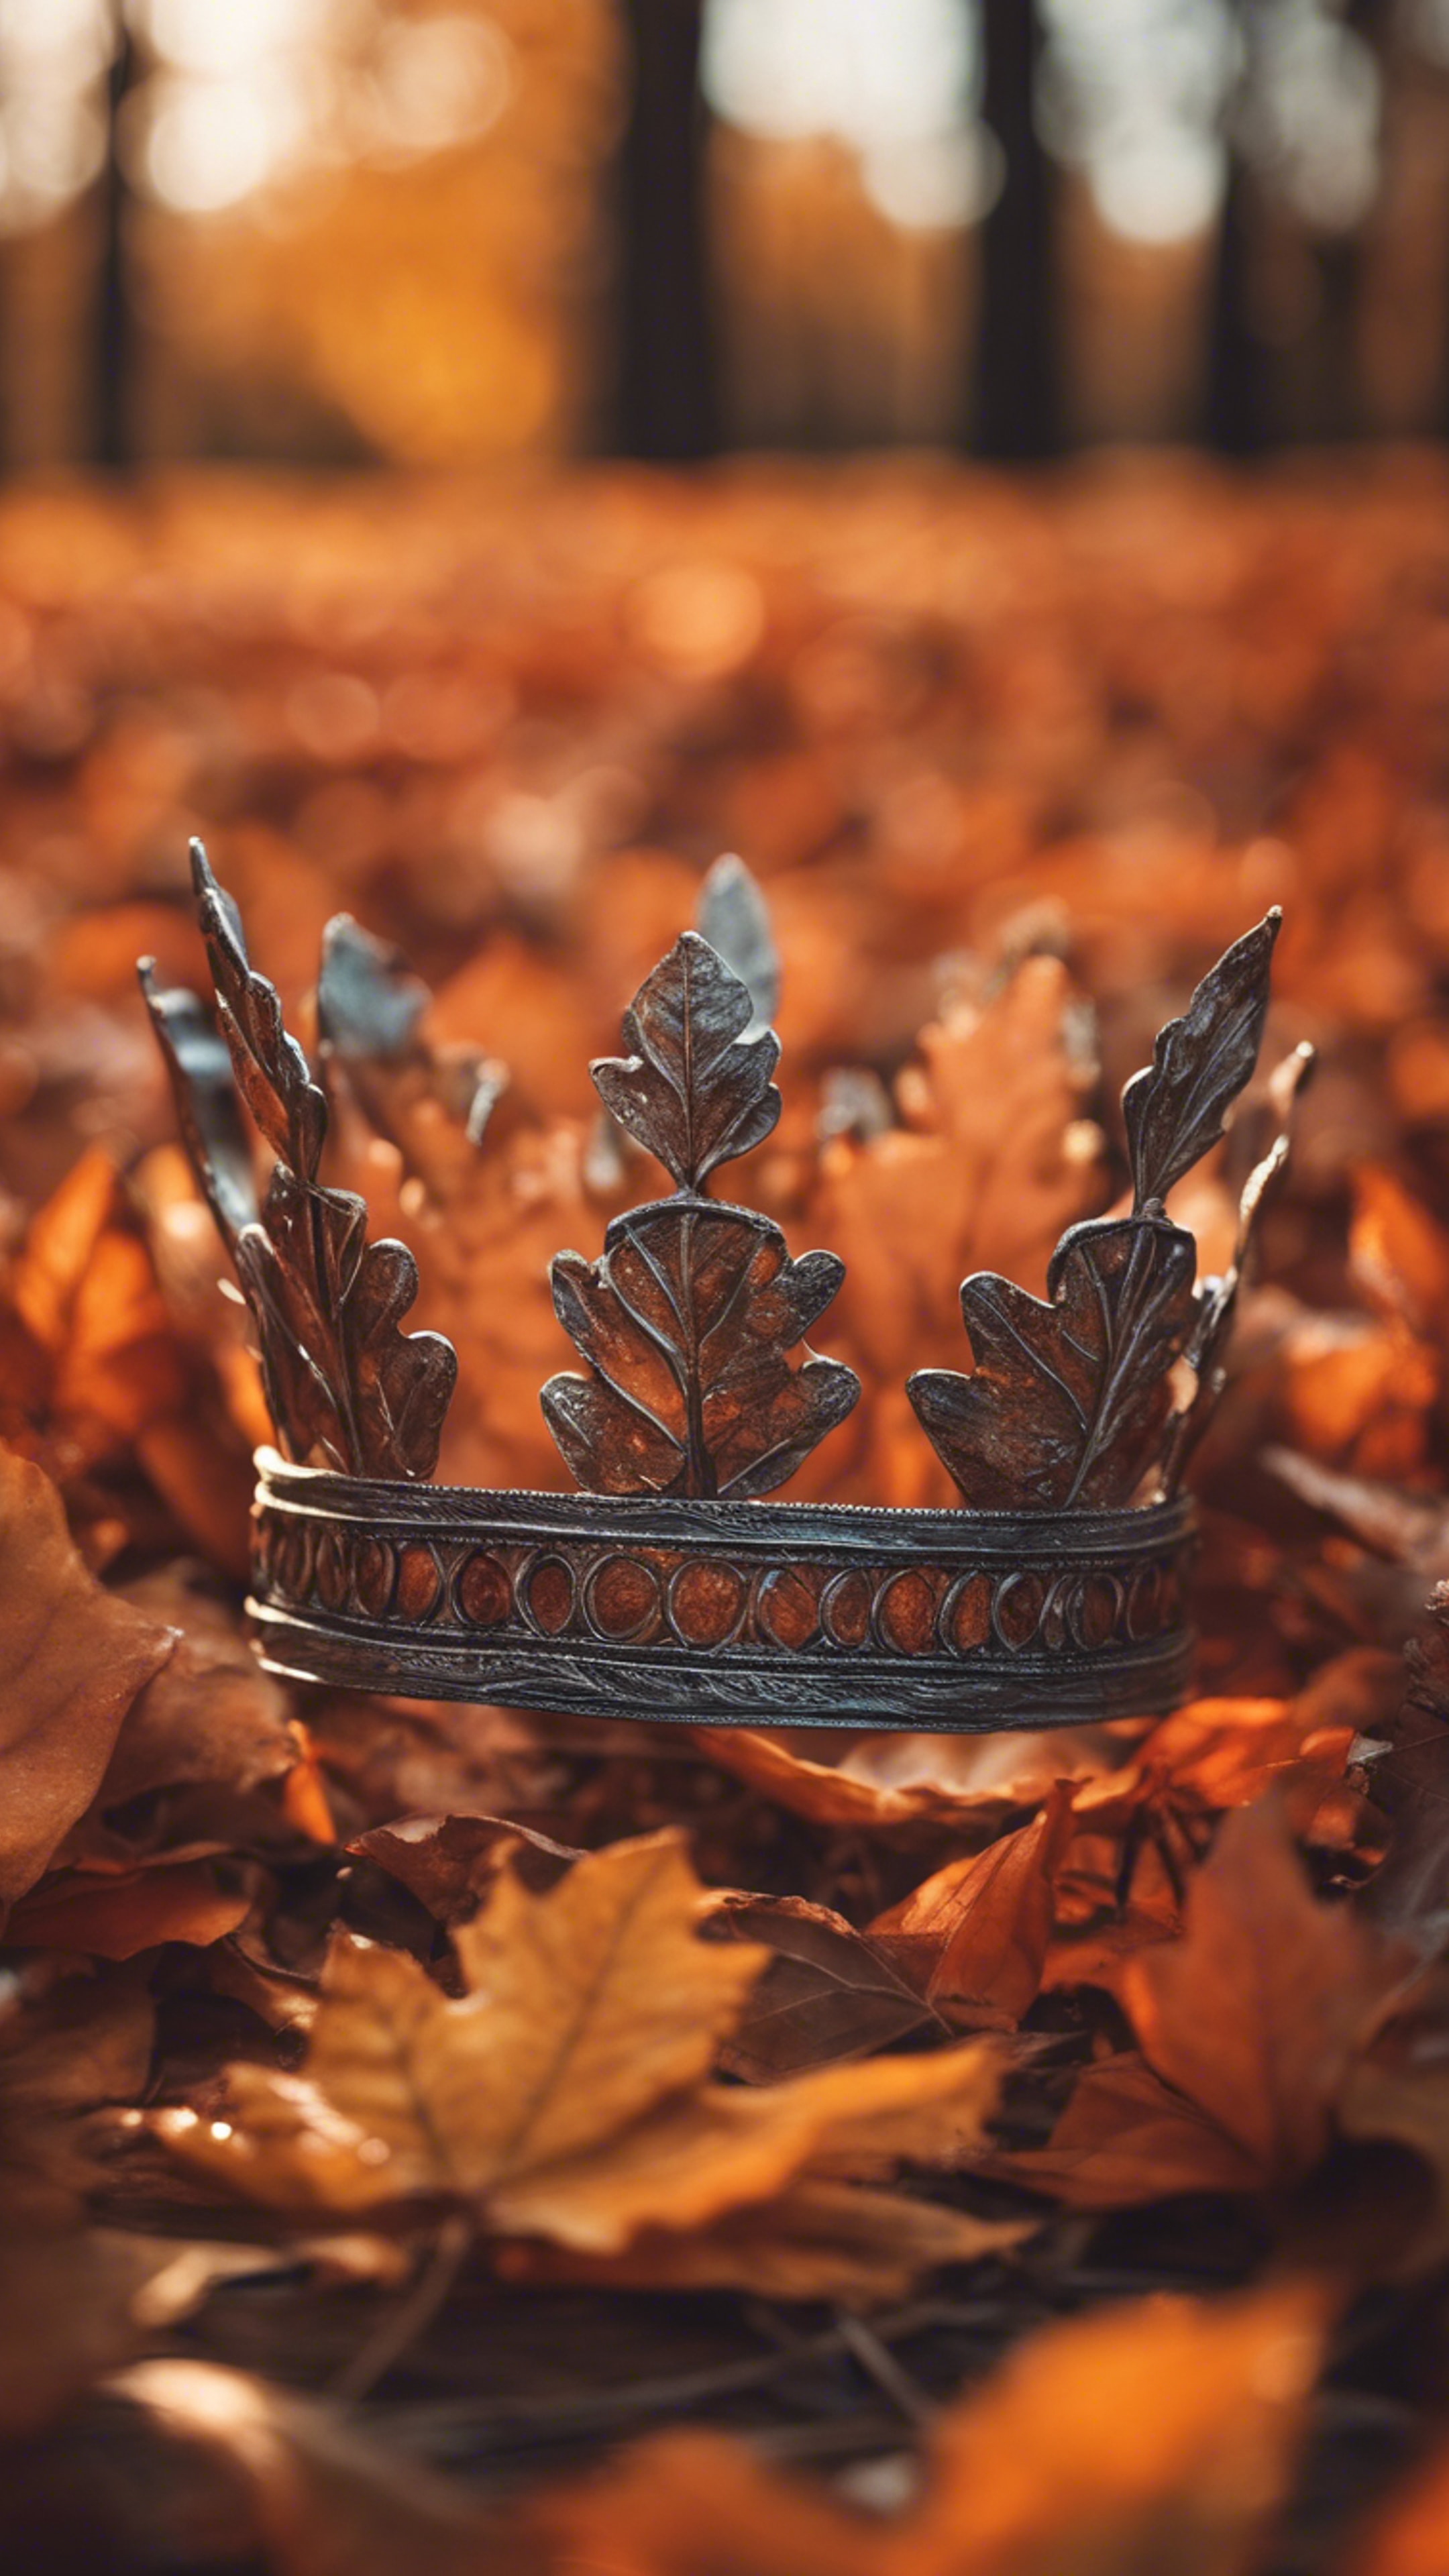 A crown made of fiery orange autumn leaves, a symbol of the season's abundance and the end of a bountiful harvest. Wallpaper[cfaded4ac96c4e3ba15a]